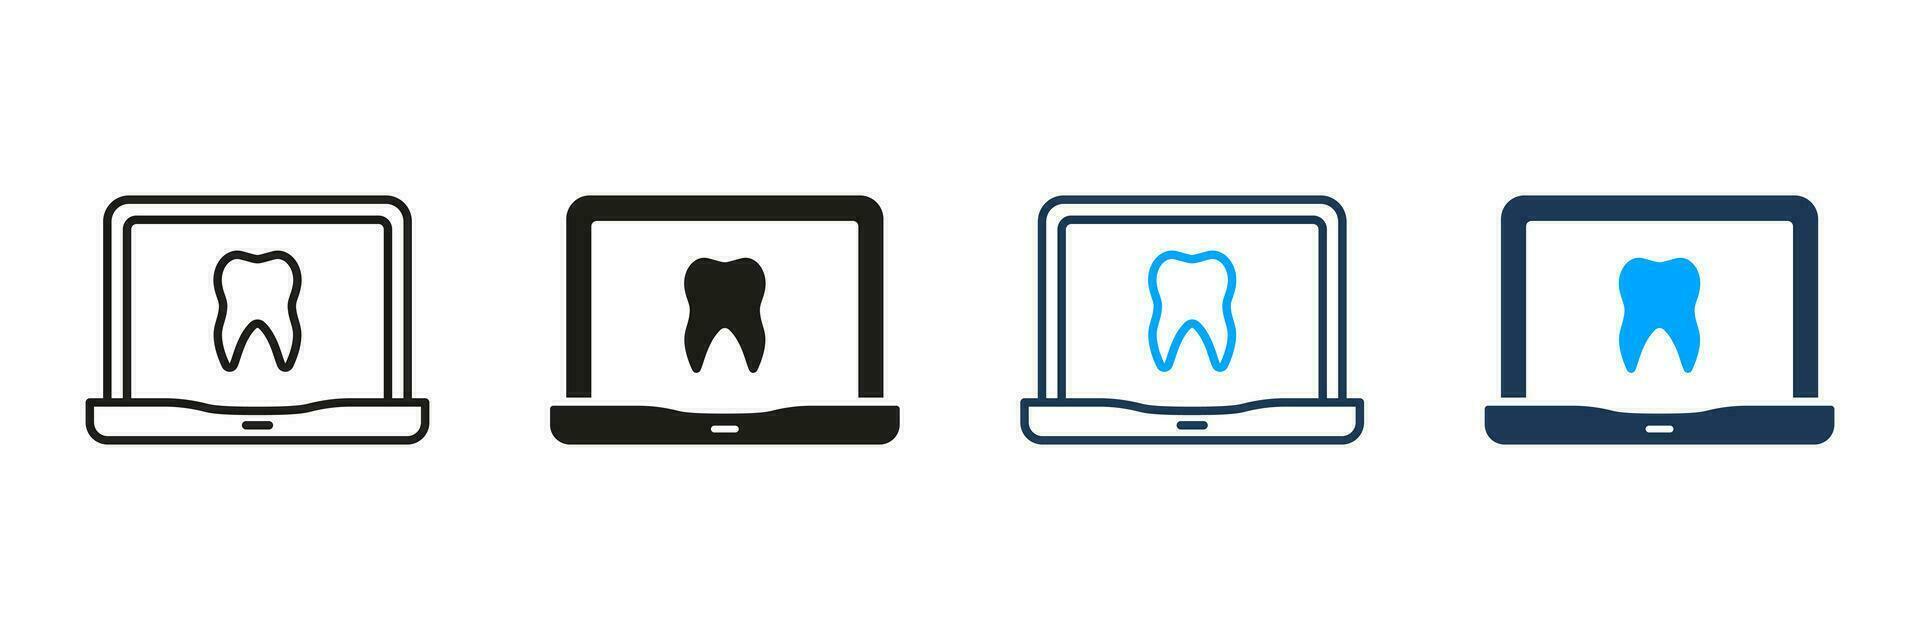 Online Dentistry Silhouette and Line Icon Set. Remote Health Diagnosis Sign. Dentist Help in Laptop Pictogram Collection. Virtual Consultation for Dental Care Symbol. Isolated Vector Illustration.